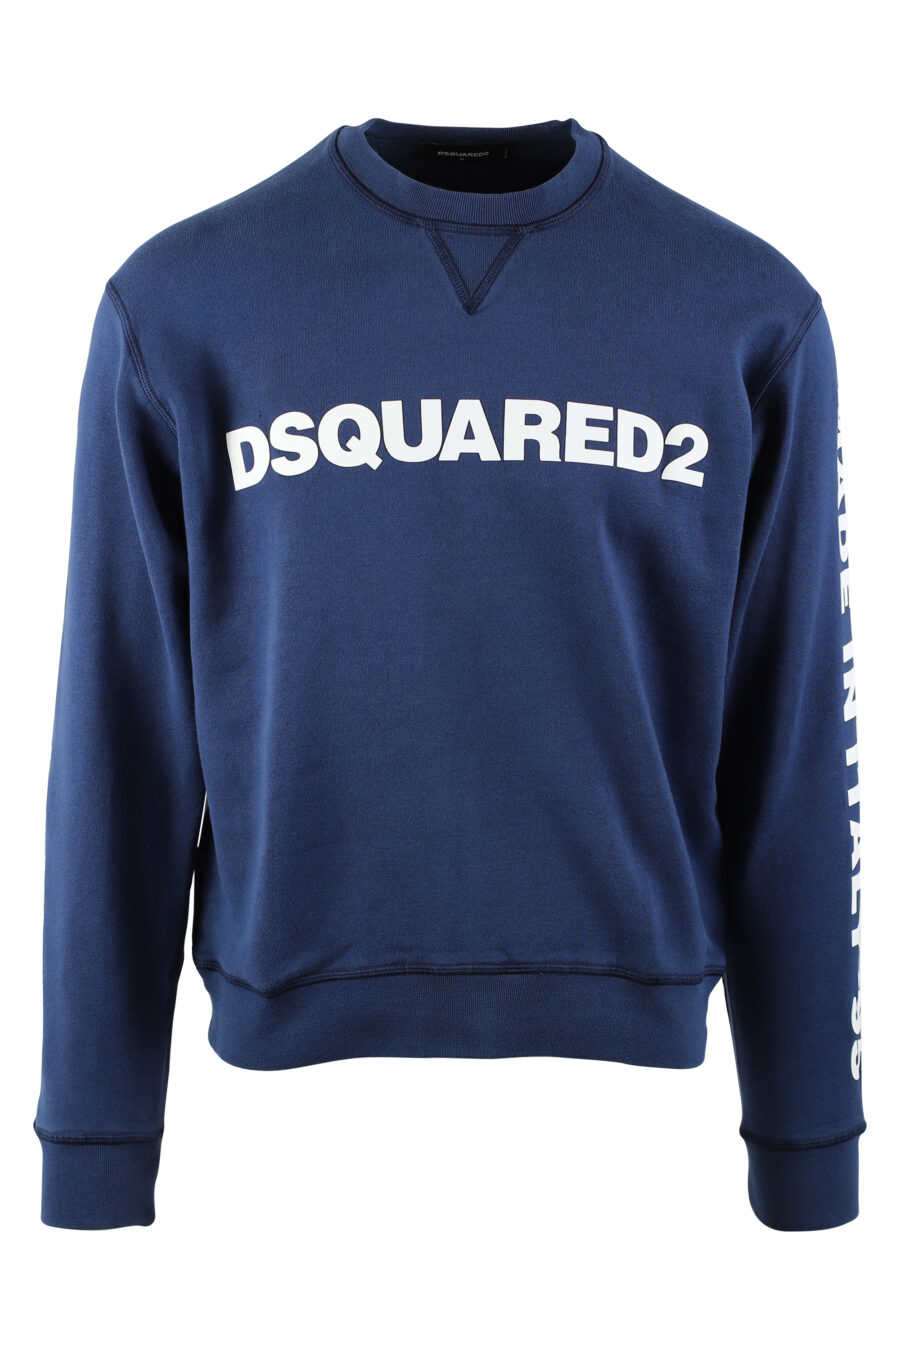 Blue sweatshirt with white maxilogue and text on sleeves - IMG 0591